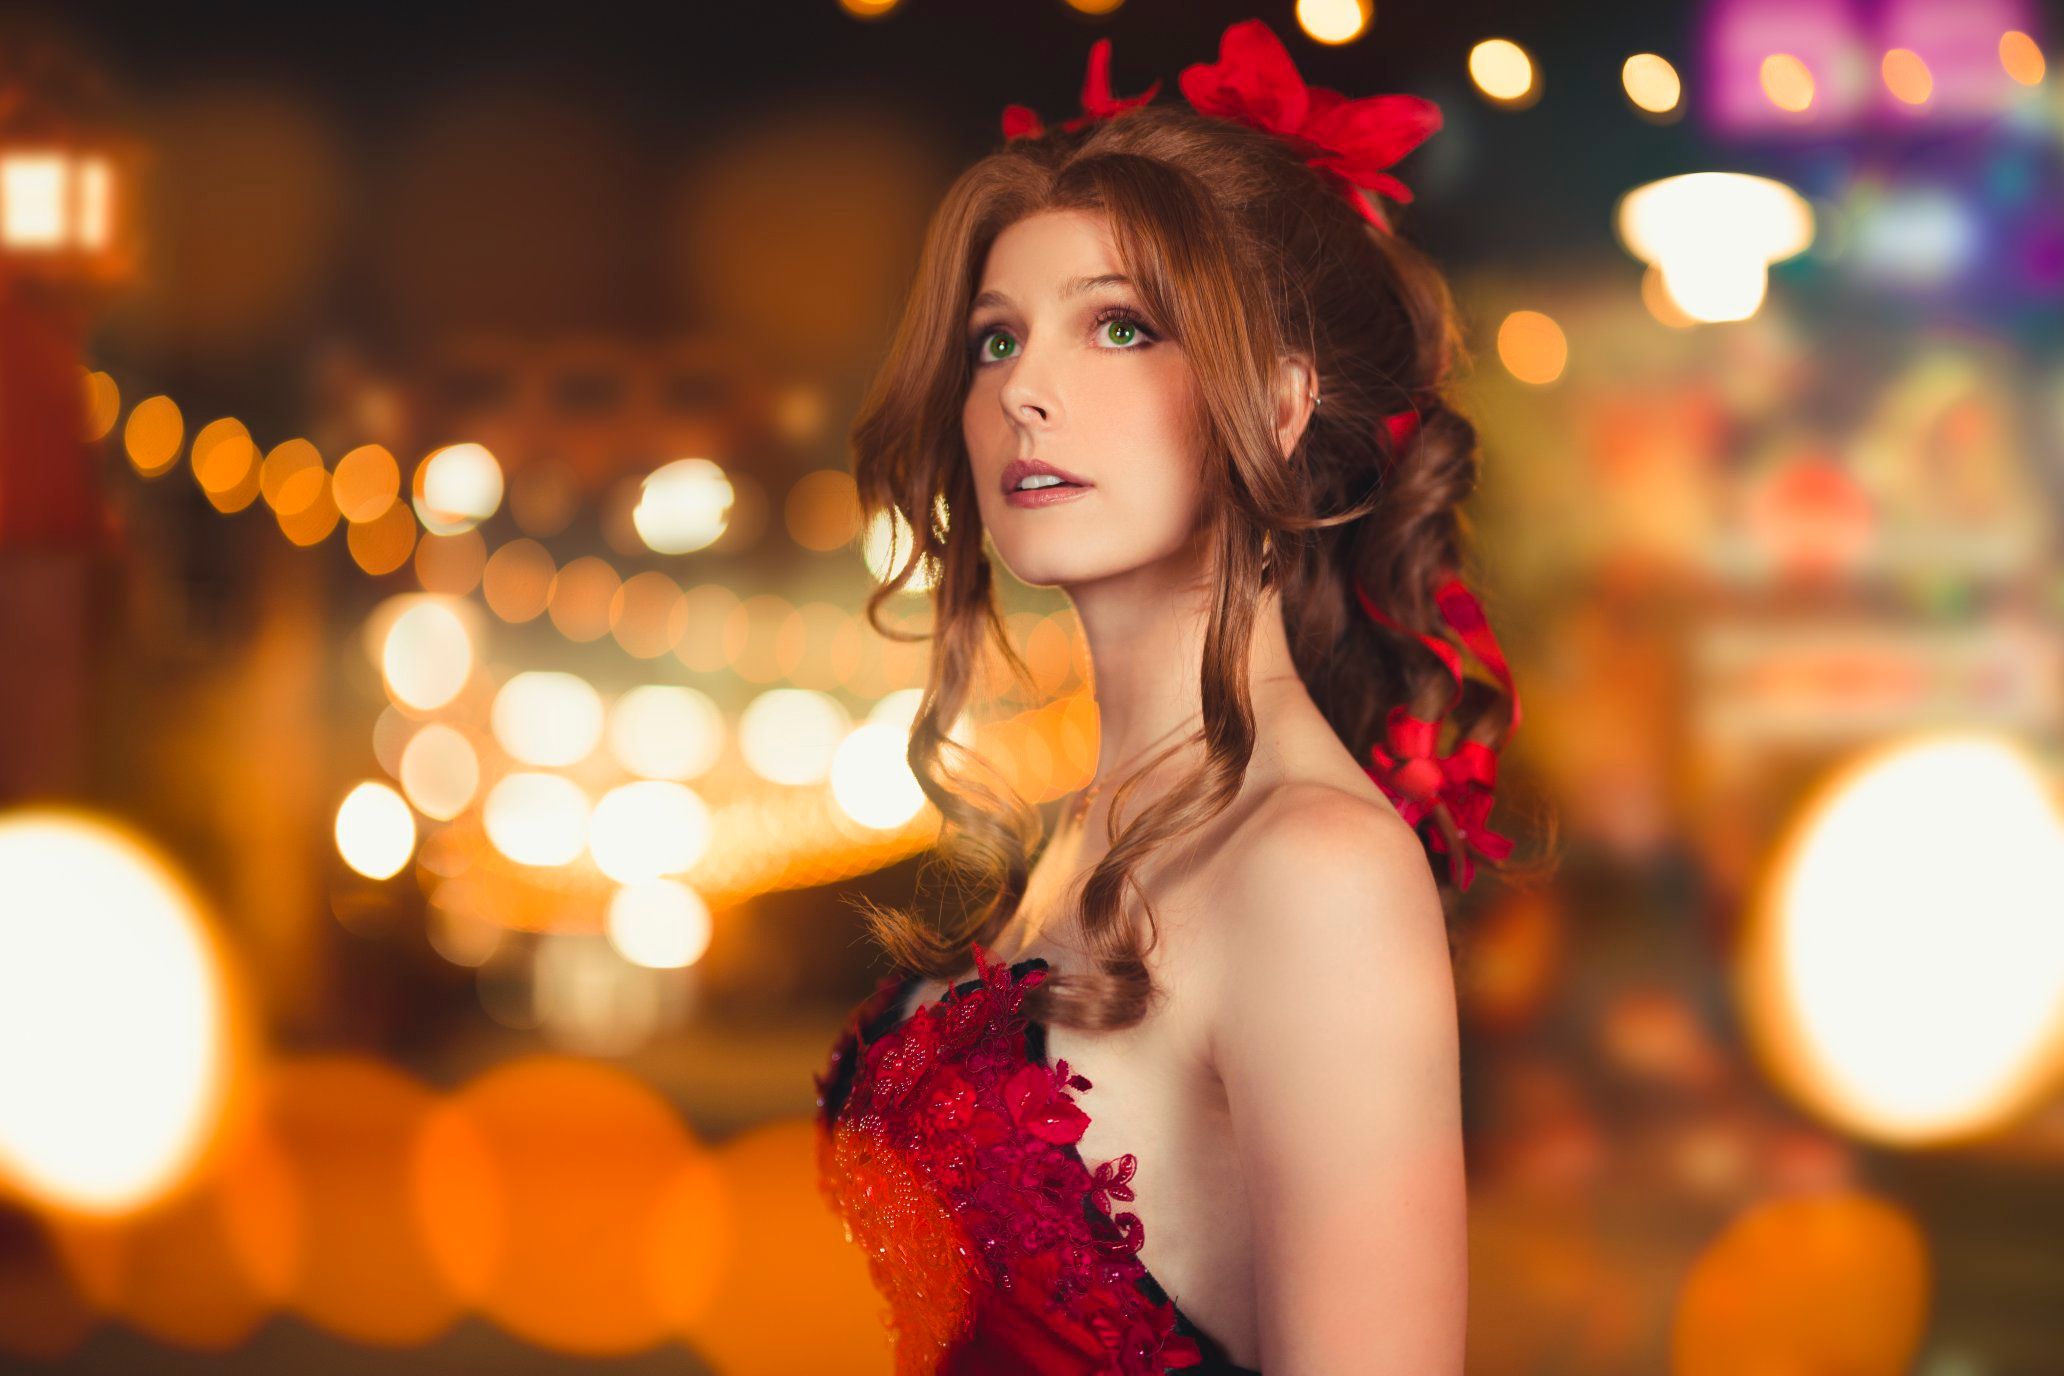 Aerith Voice Actor Wears The Red Dress In Stunning Final Fantasy 7